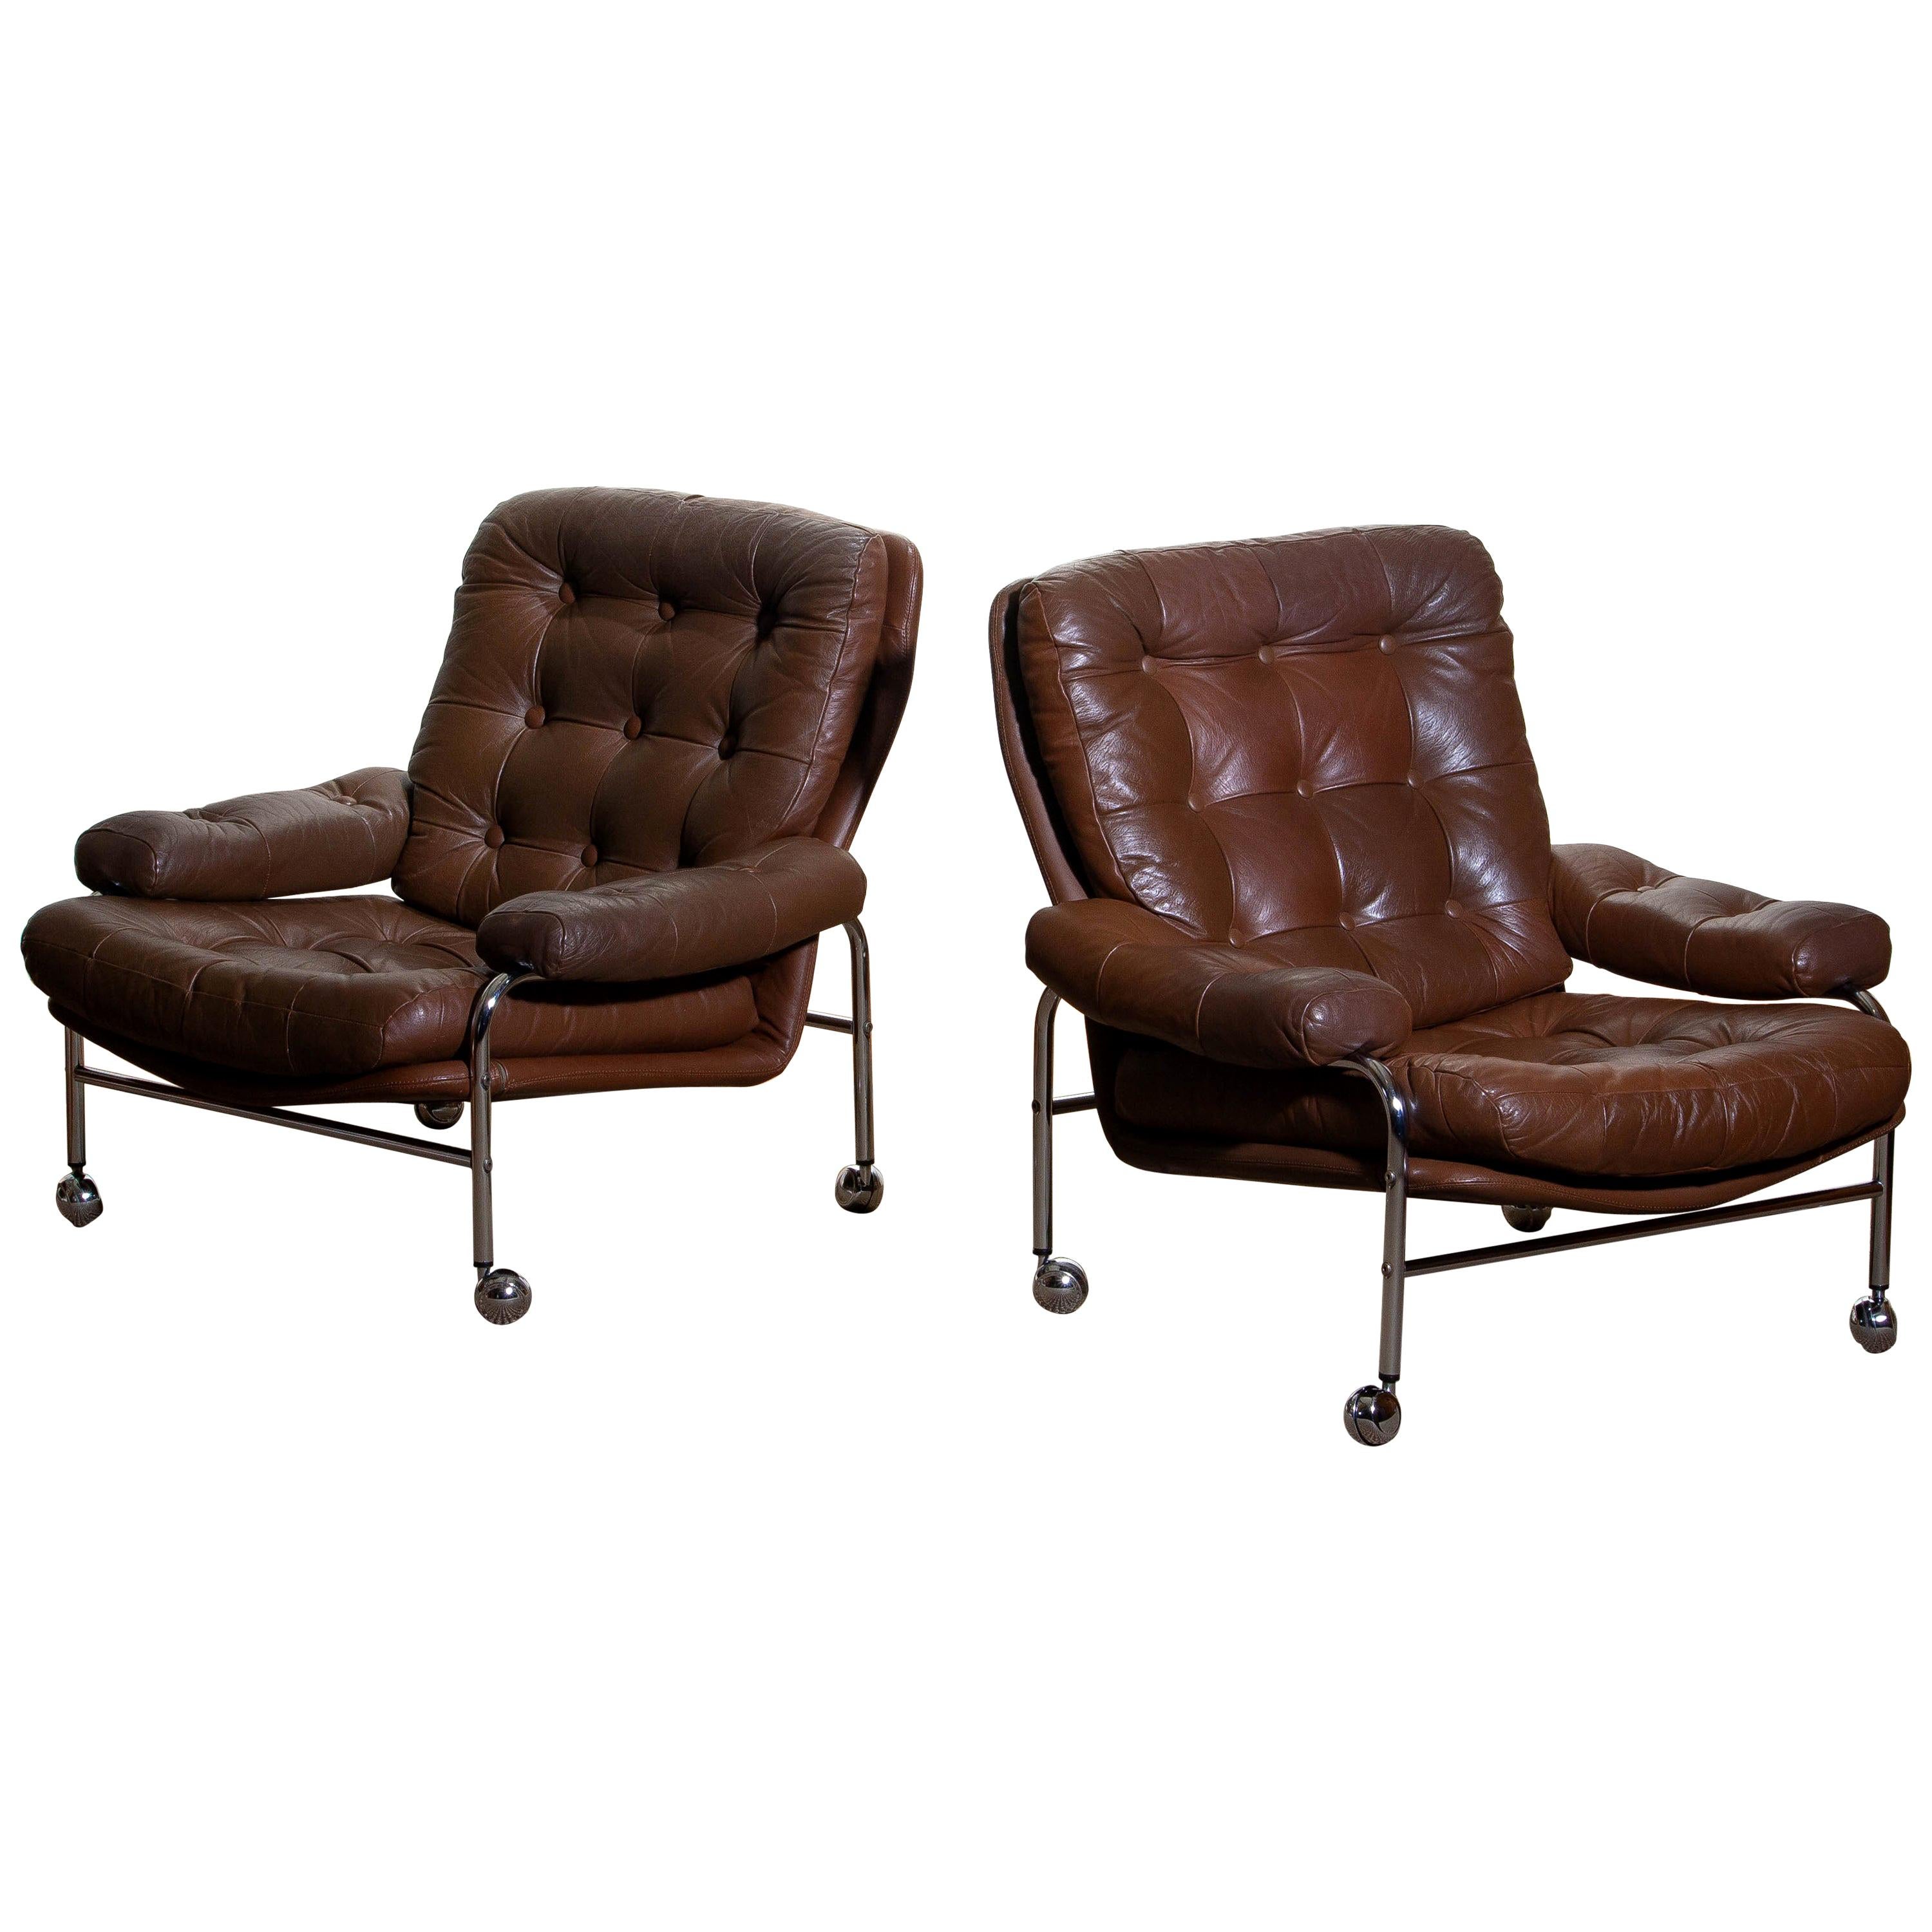 1970s, Chrome and Brown Leather Lounge Chairs by Scapa Rydaholm, Sweden 3